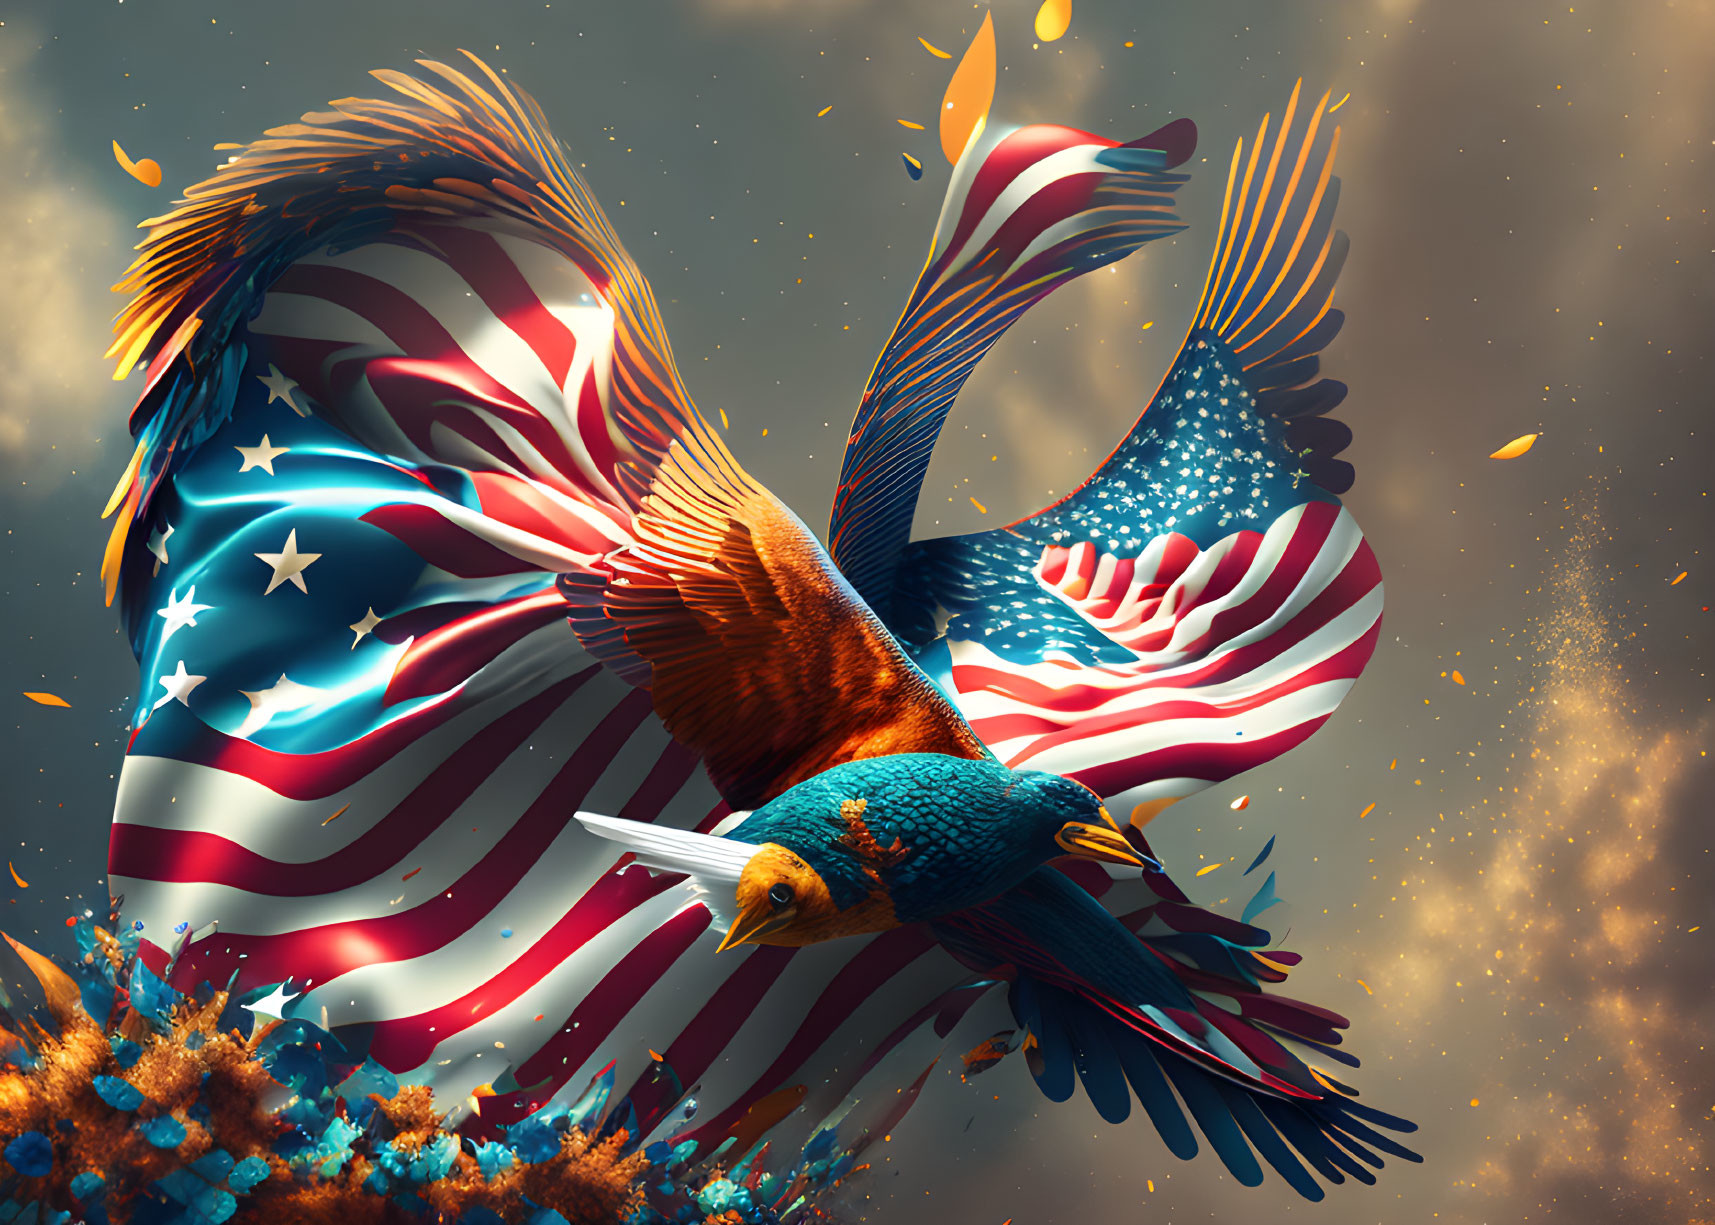 American flag-themed eagle flying in sparkly sky